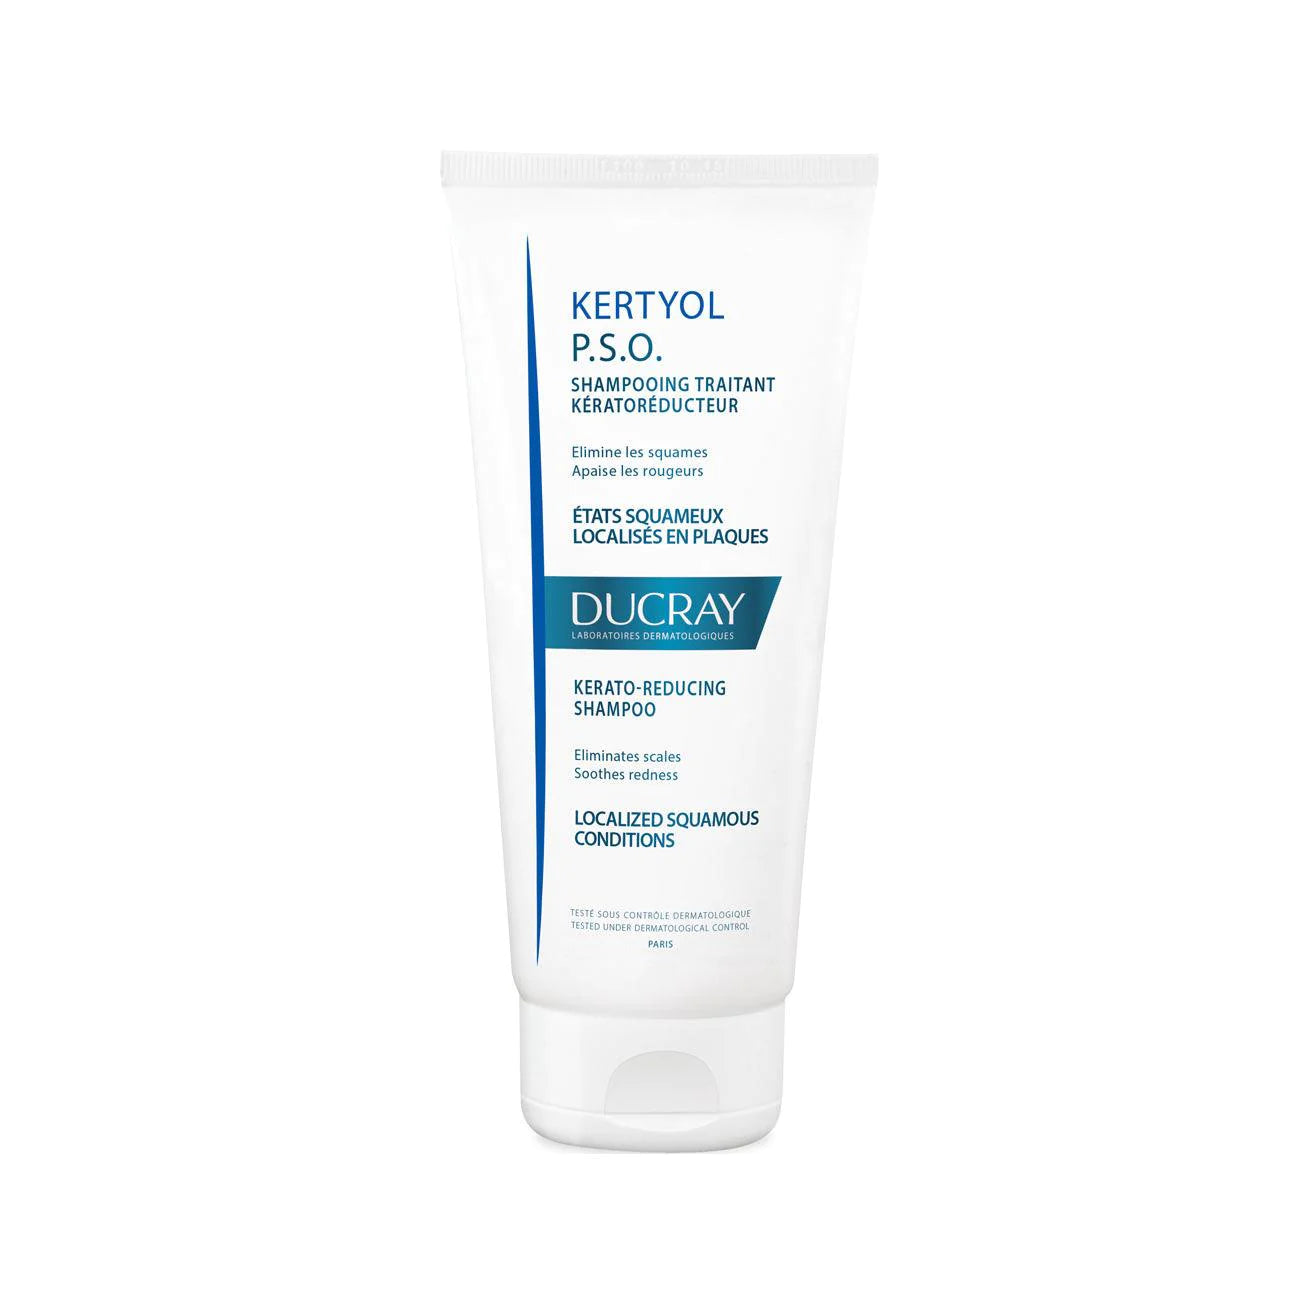 DUCRAY Kertyol P.S.O Kerato-Reducing Shampoo - Localized Squamous Conditions